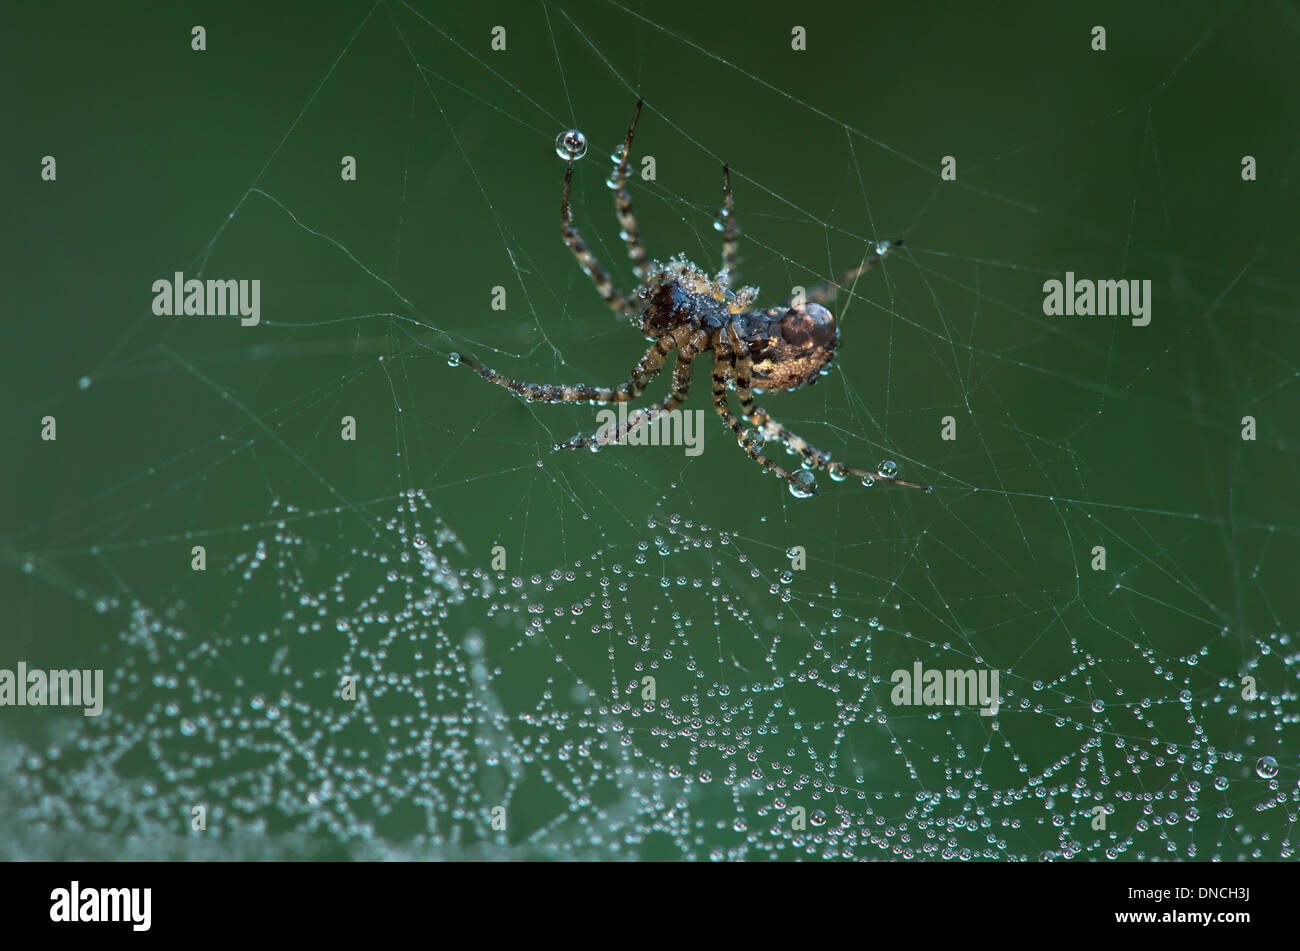 Neriene montana spider of Linyphiidae family covered with dew drops Stock Photo